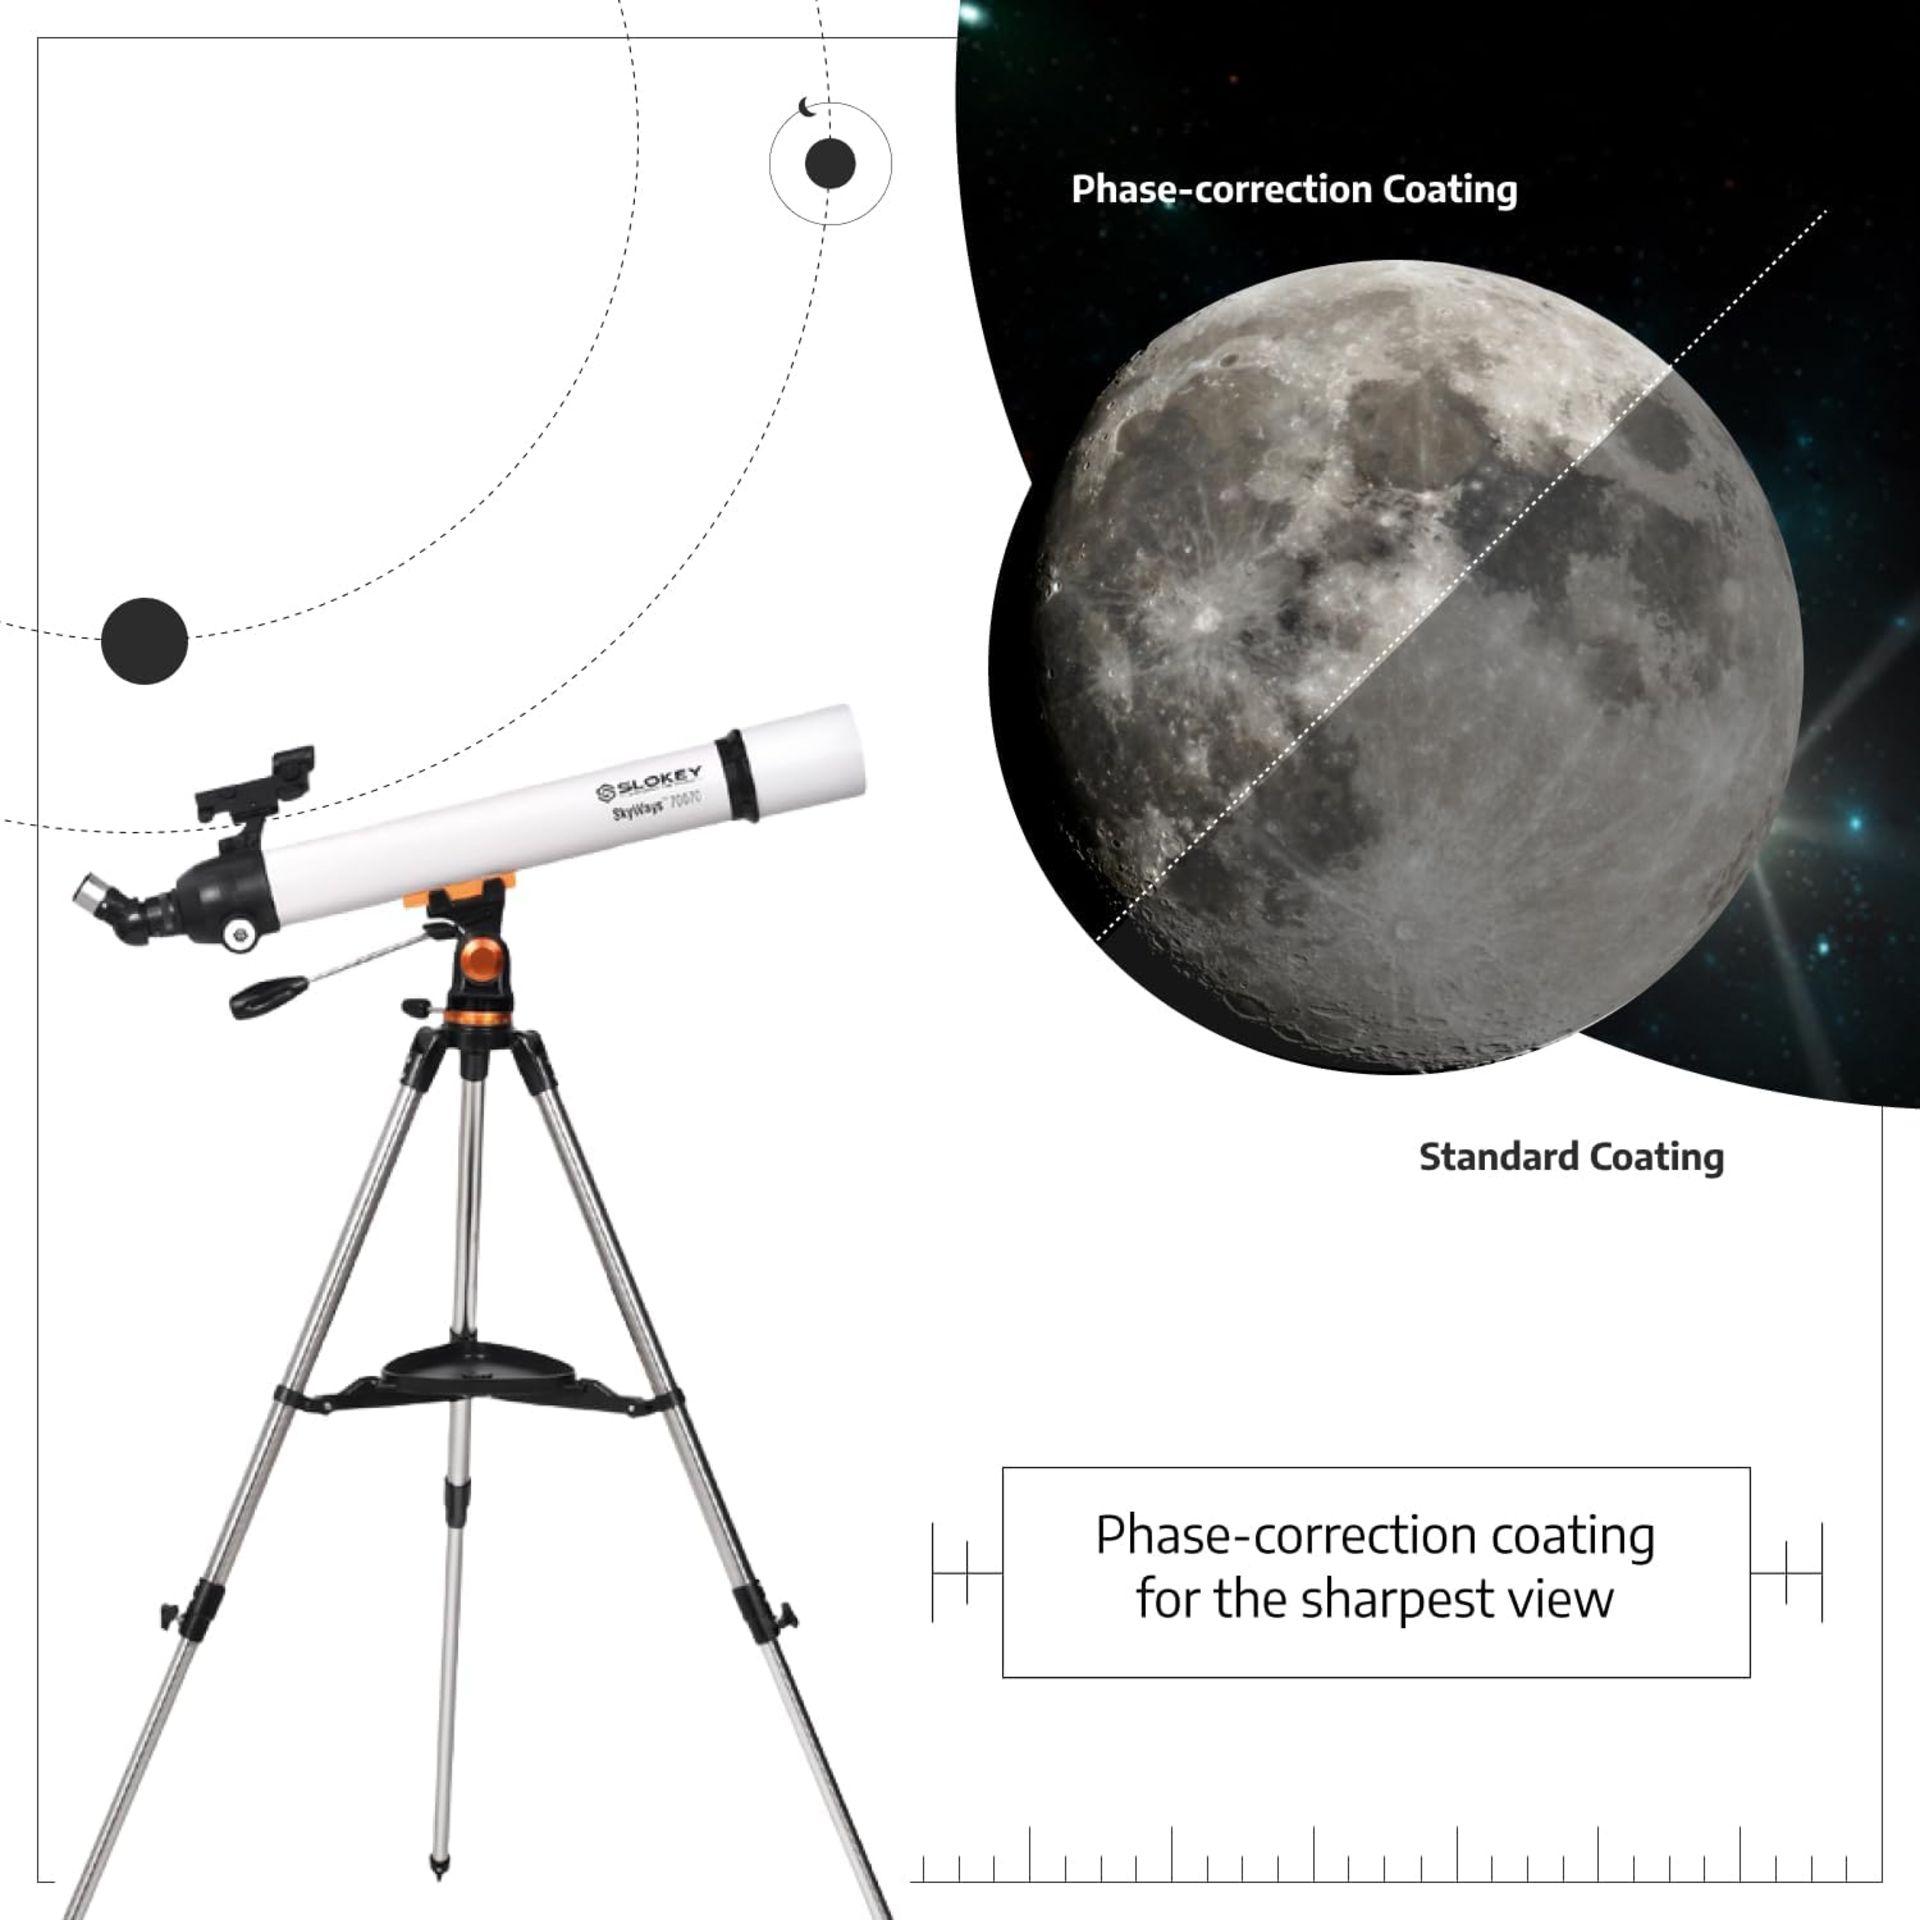 1X SLOKEY 70070 SKYWAYS TELESCOPE FOR ASTRONOMY WITH ACCESSORIES (NEW) - AMAZON RRP £159.99 - Image 8 of 11